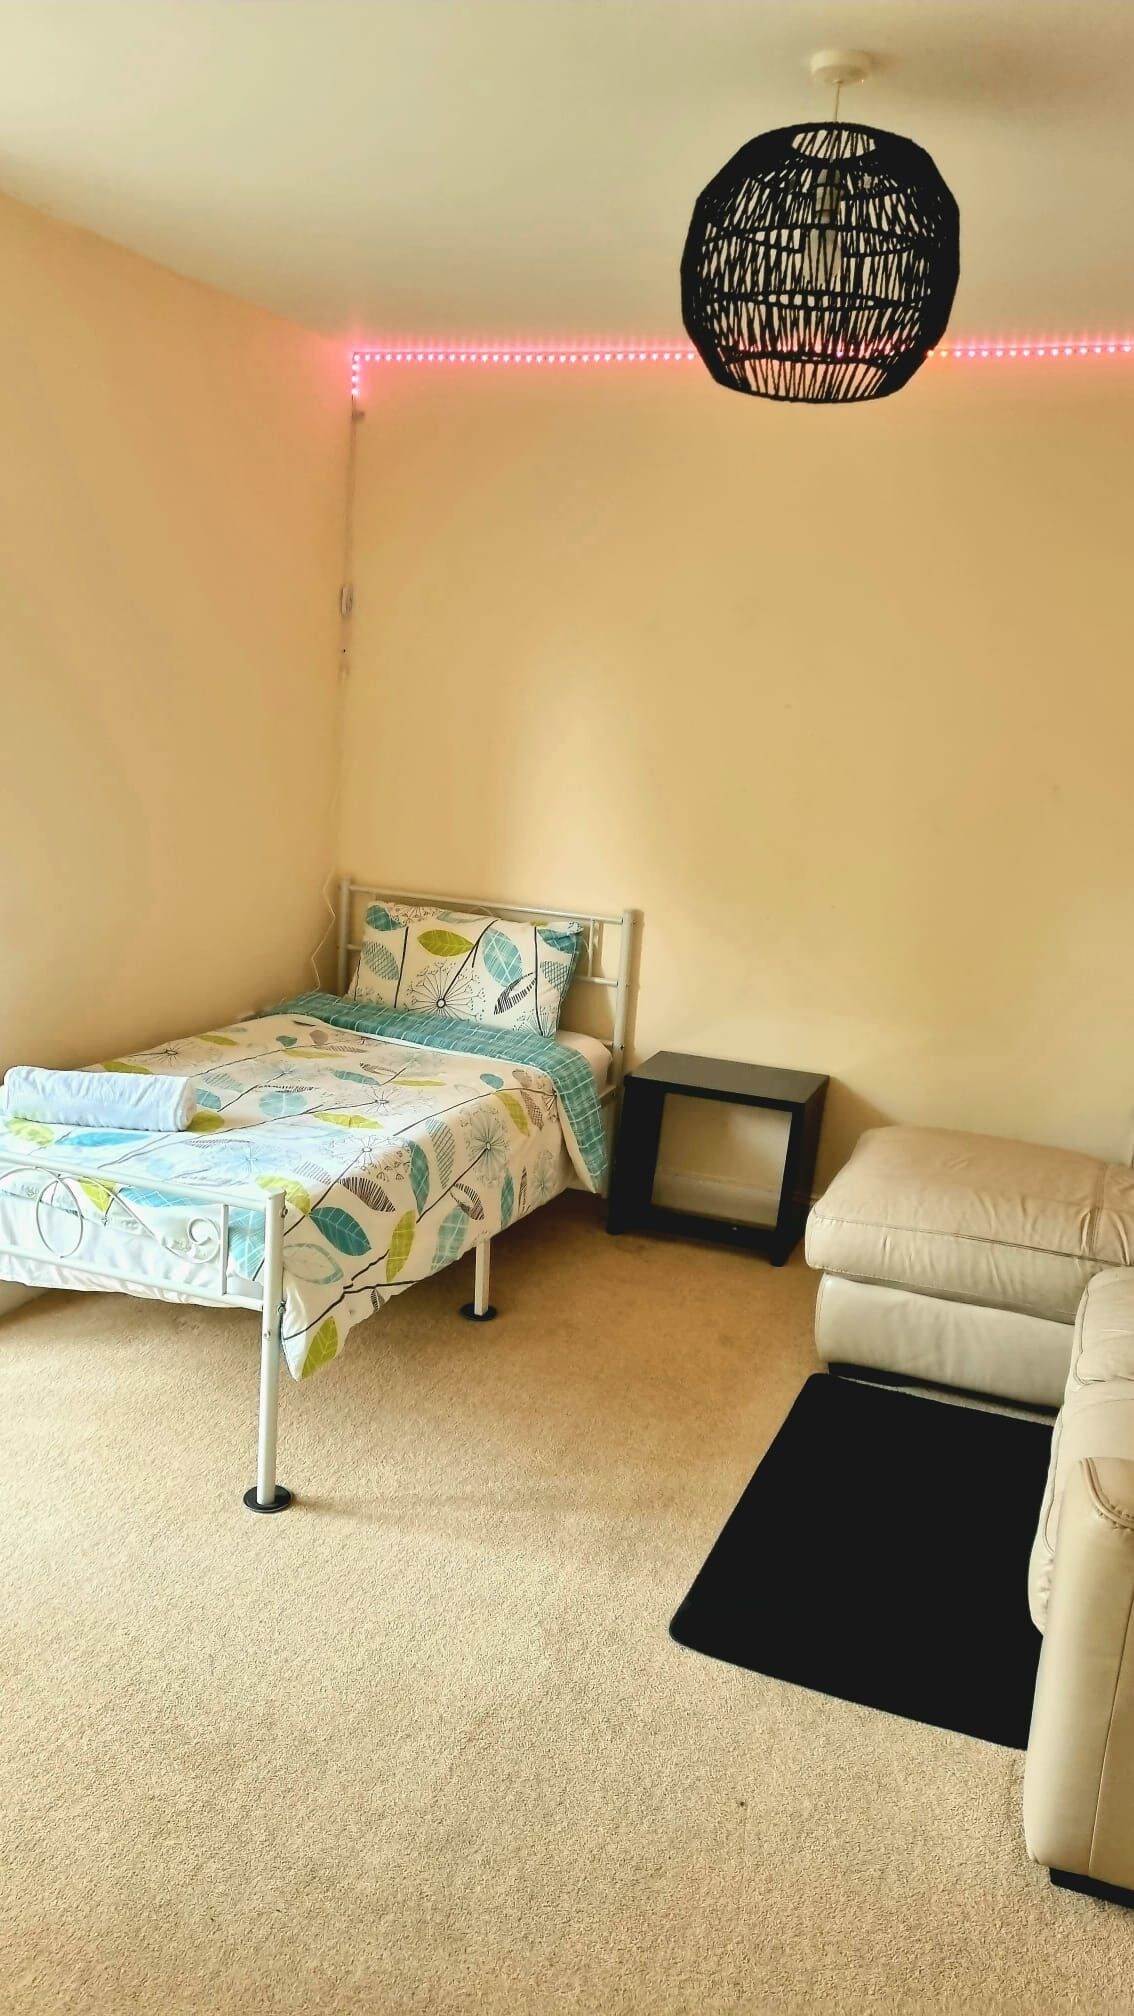 Spacious Single bedroom in a Friendly Family Home